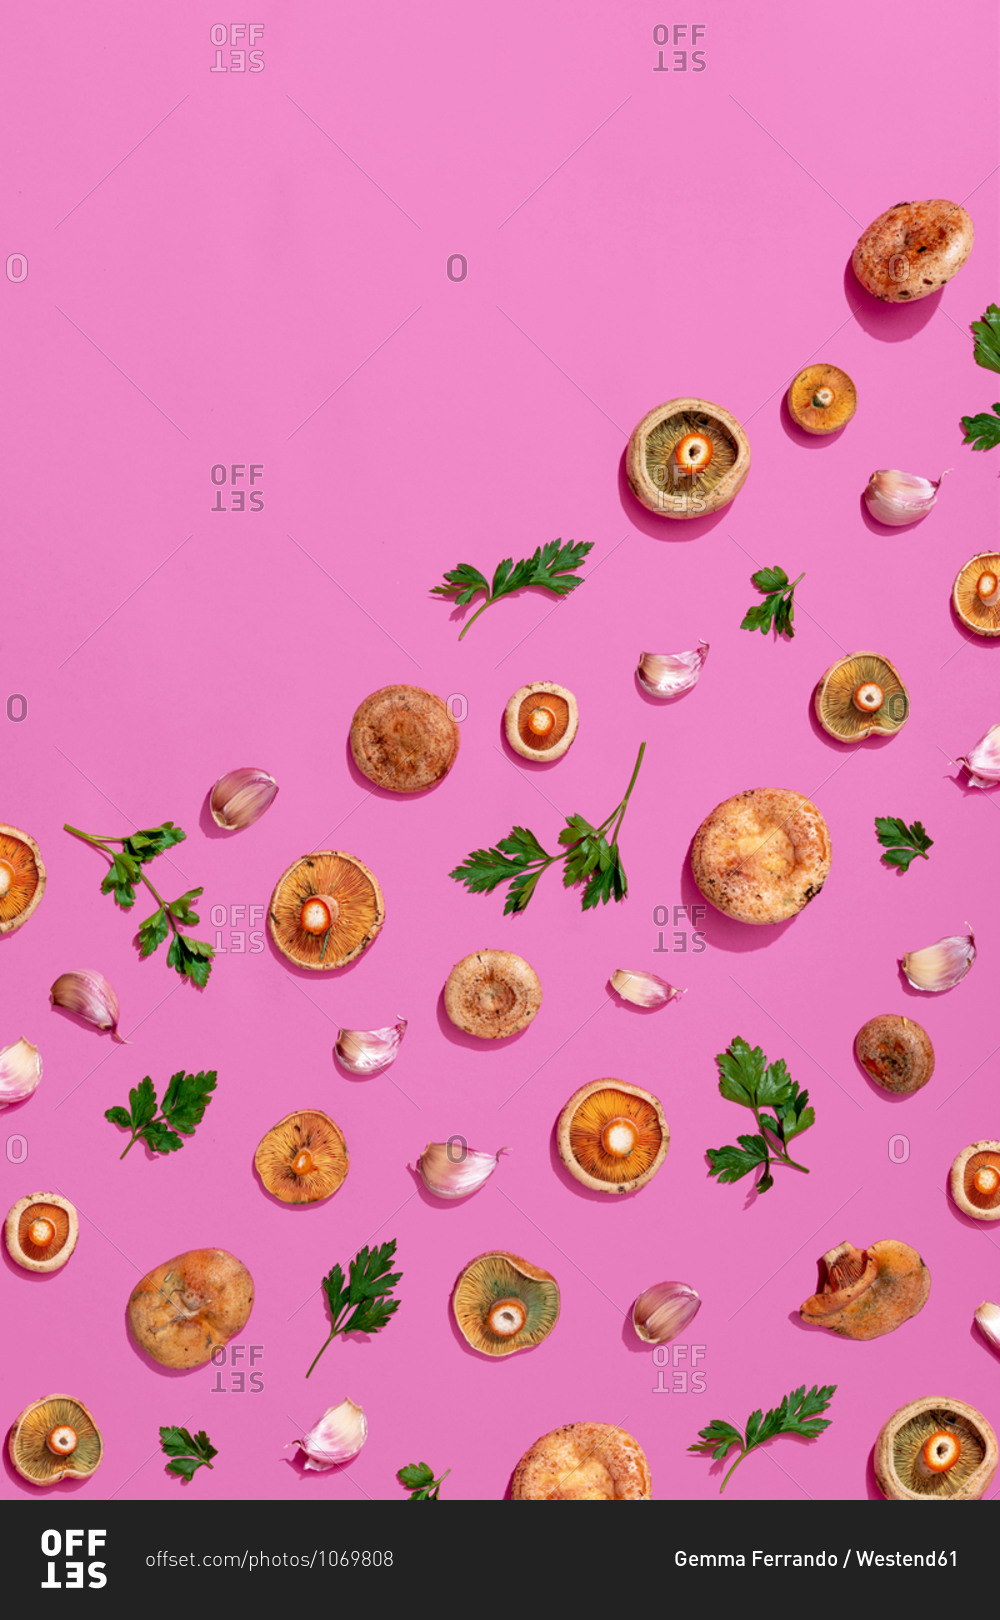 Pattern of mushroom- parsley and garlic assorted on pink background